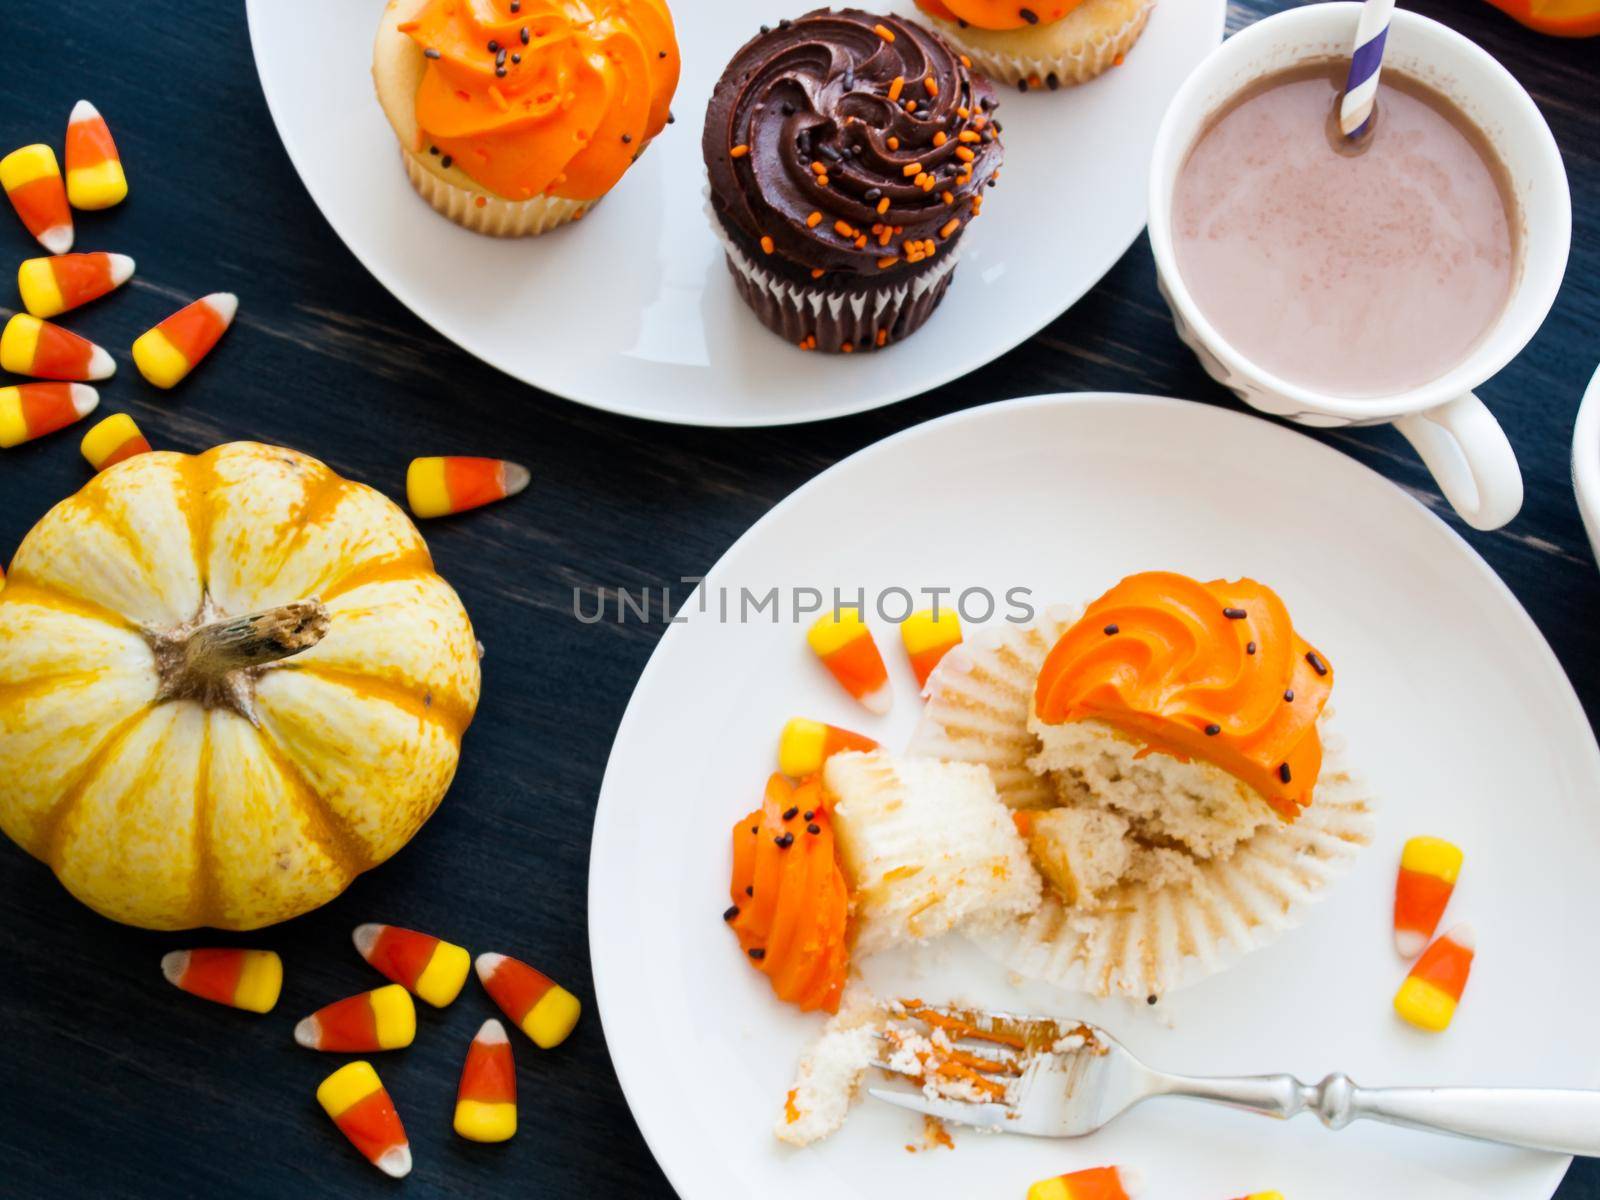 Eating Halloween cupcakes with orange and black icing.